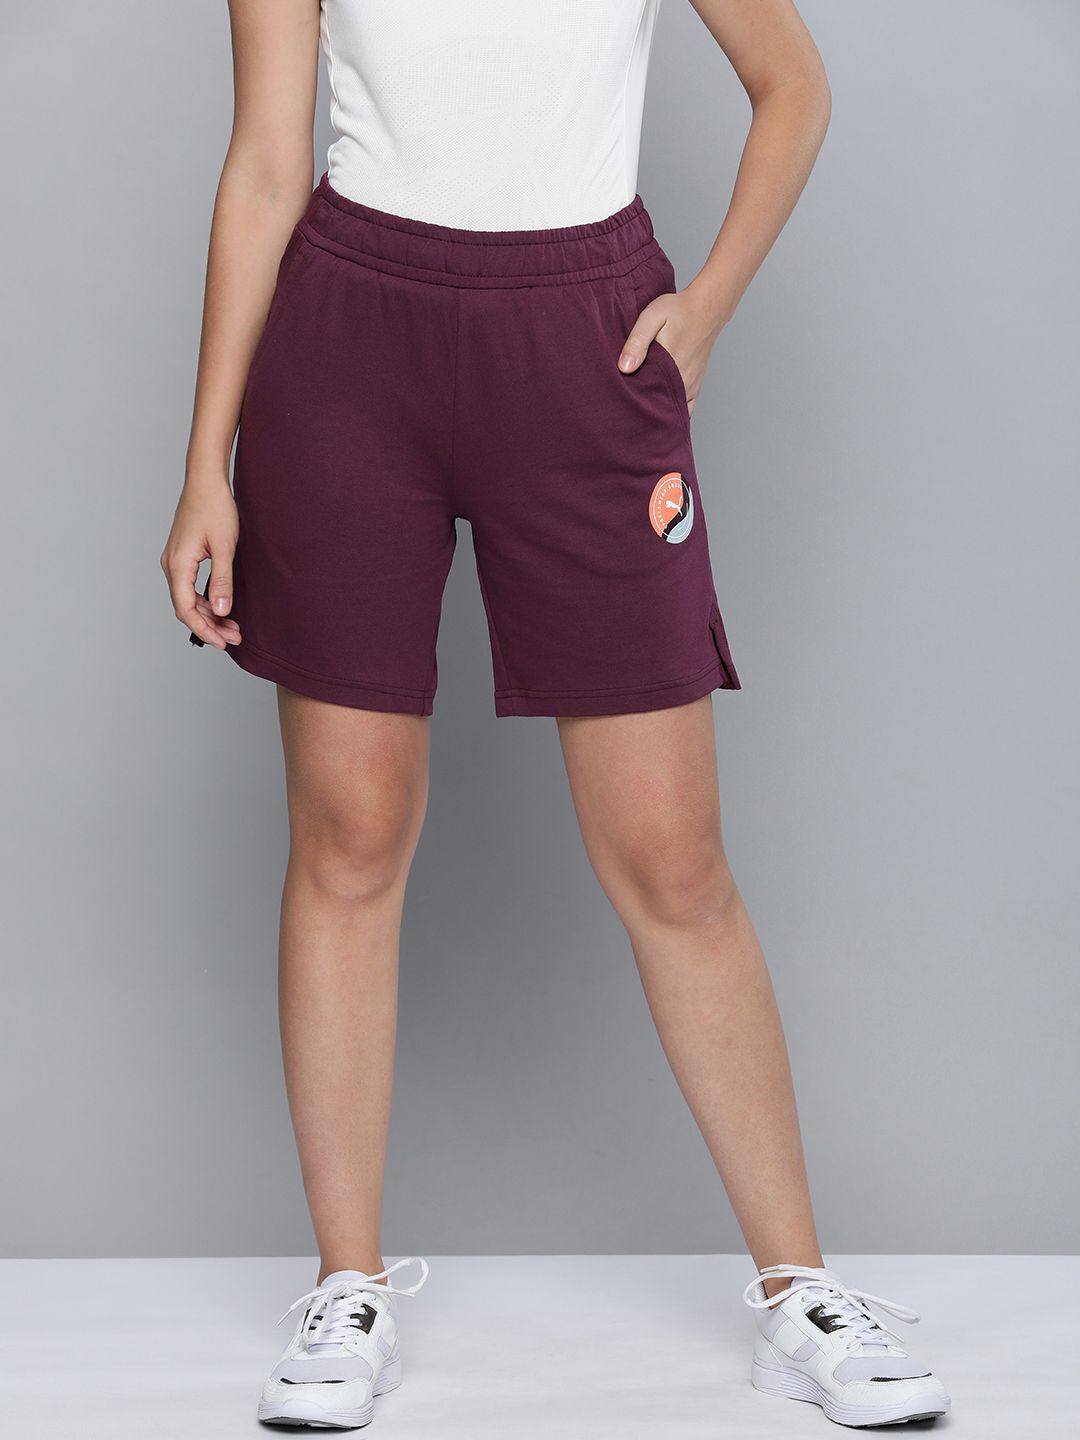 Puma Women Burgundy Graphic Logo Printed Loose Fit Sports Shorts Price in India